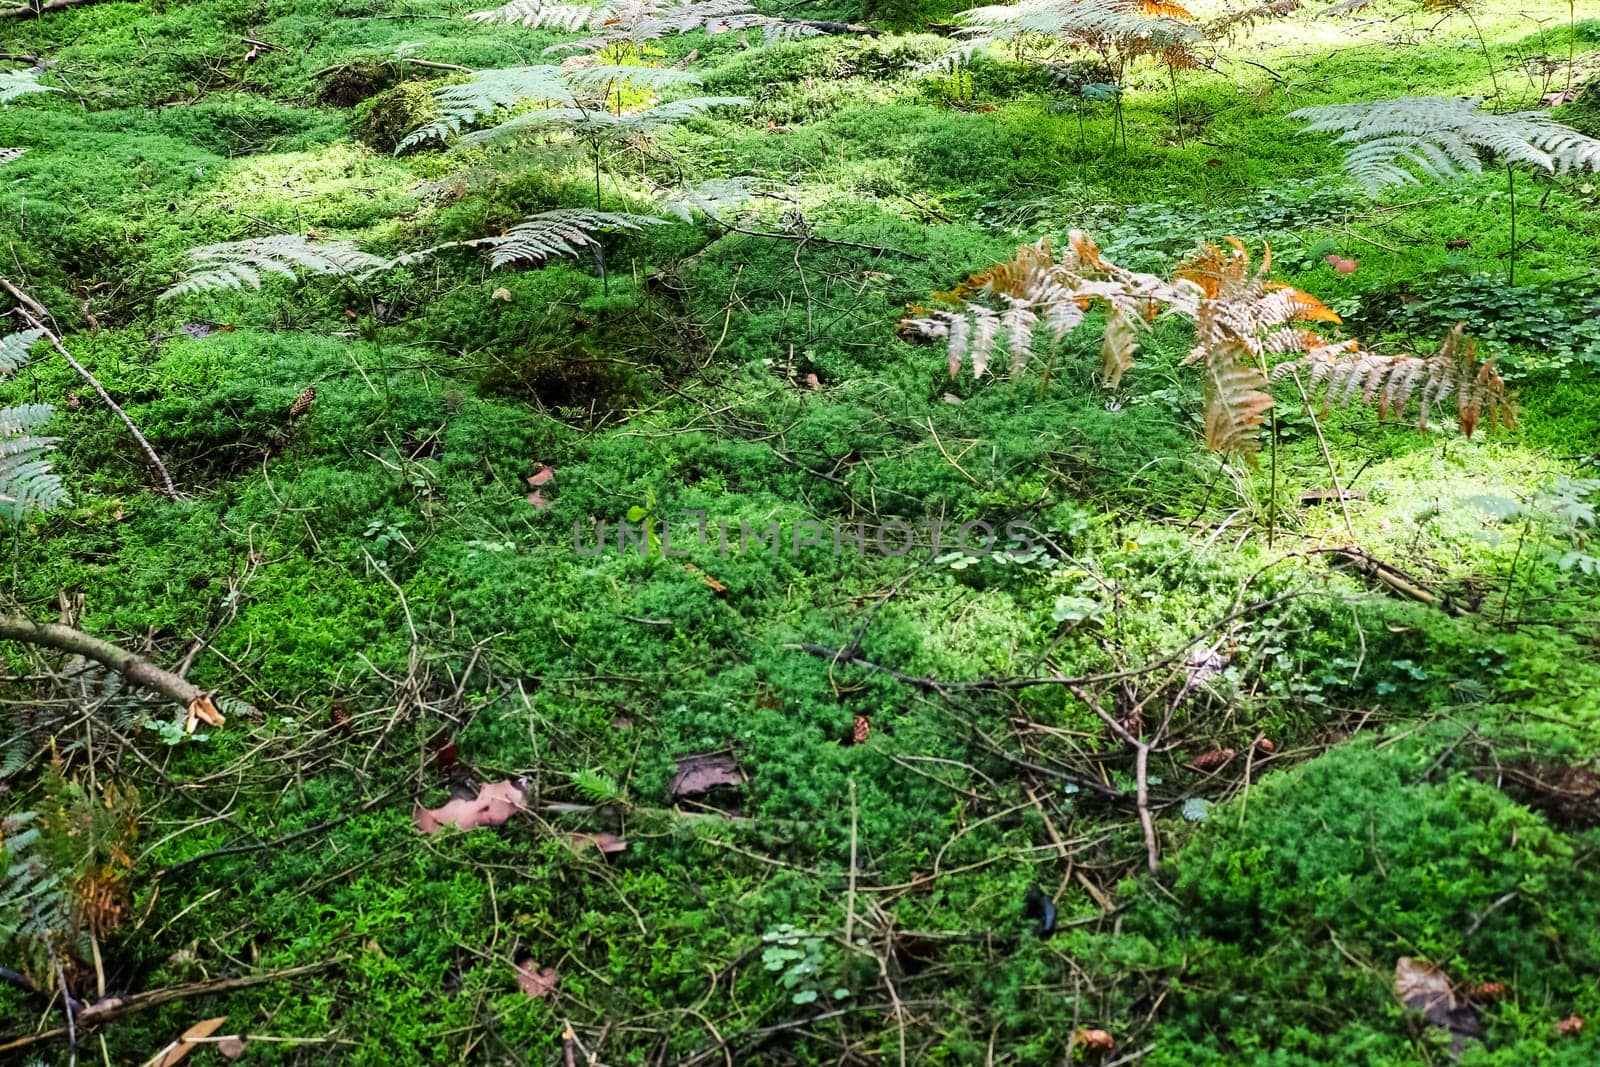 View on a forest ground texture with moss and branches found in a european forest